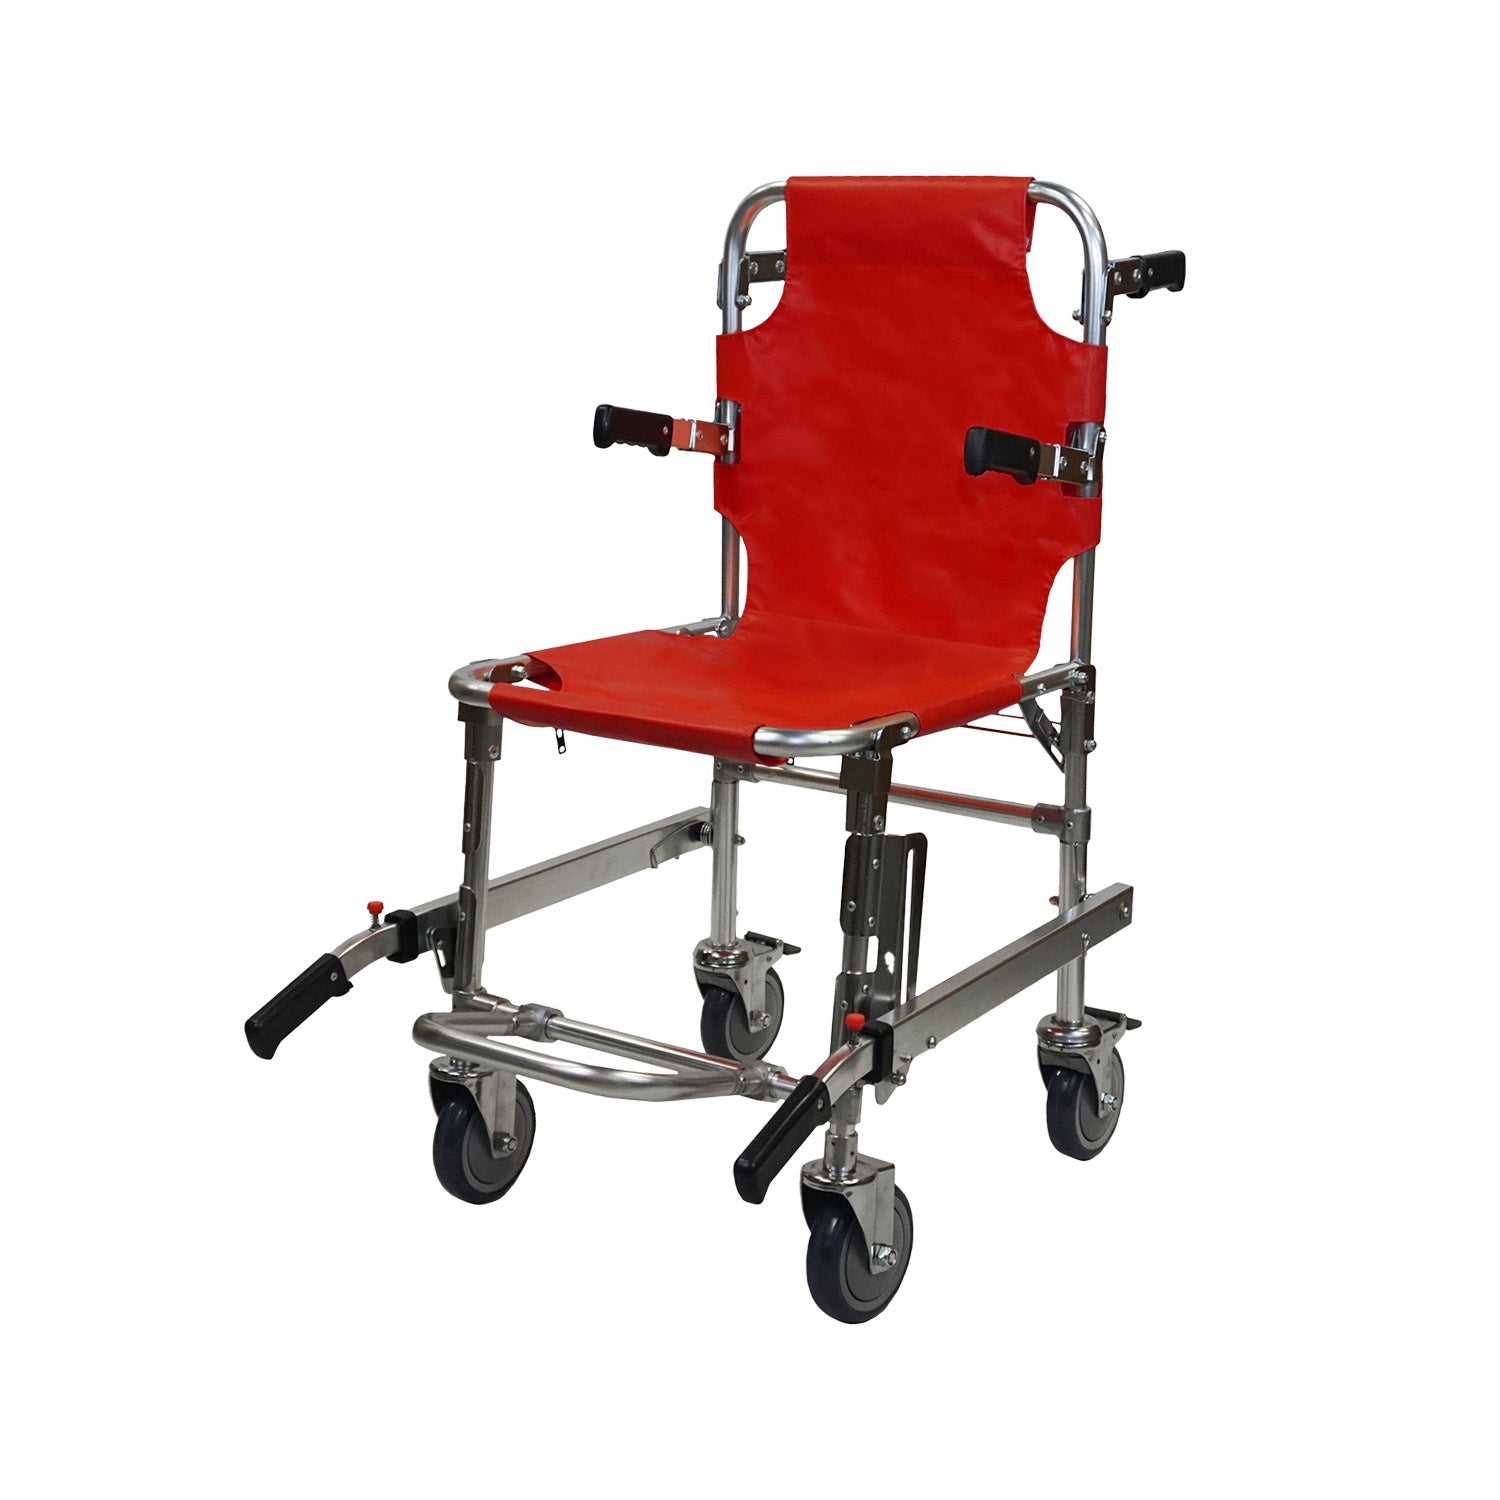 Hyperlite Evacuation Foldable Medical Stair Lift Chair Portable EMS, EMTs, Ambulance, and Emergency Transport Stair Chair, Men's, Size: 35.4” Large x